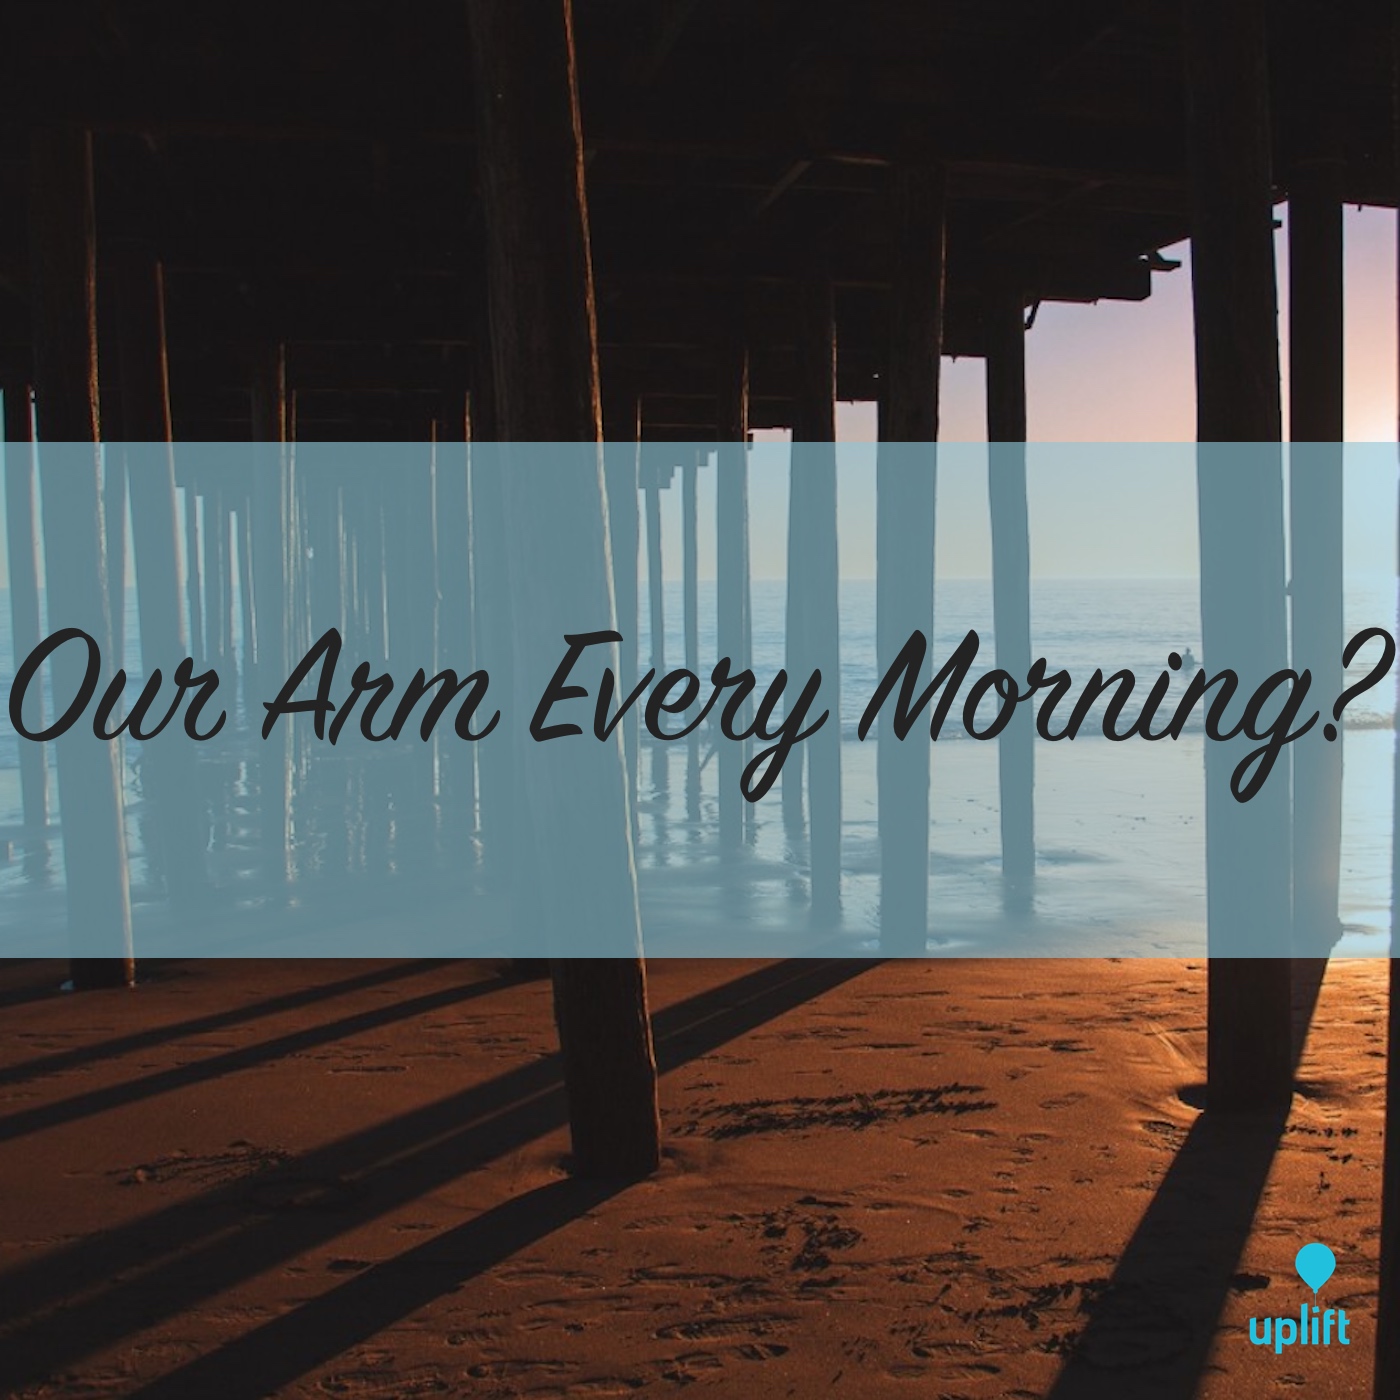 Episode 18: Our Arm Every Morning?